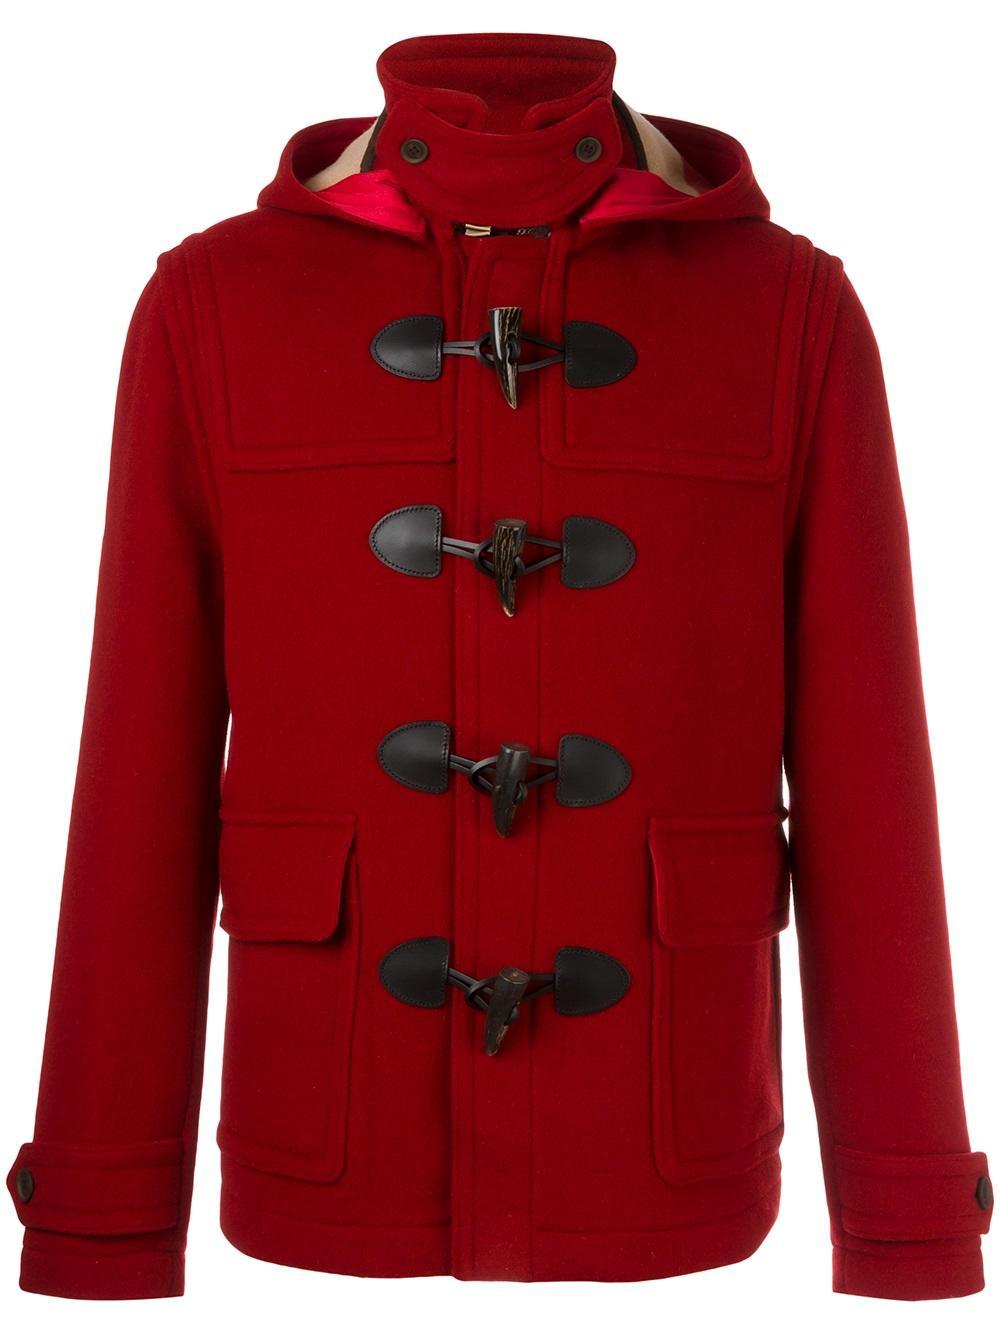 Burberry Burwood Wool Duffle Coat in Red for Men - Lyst